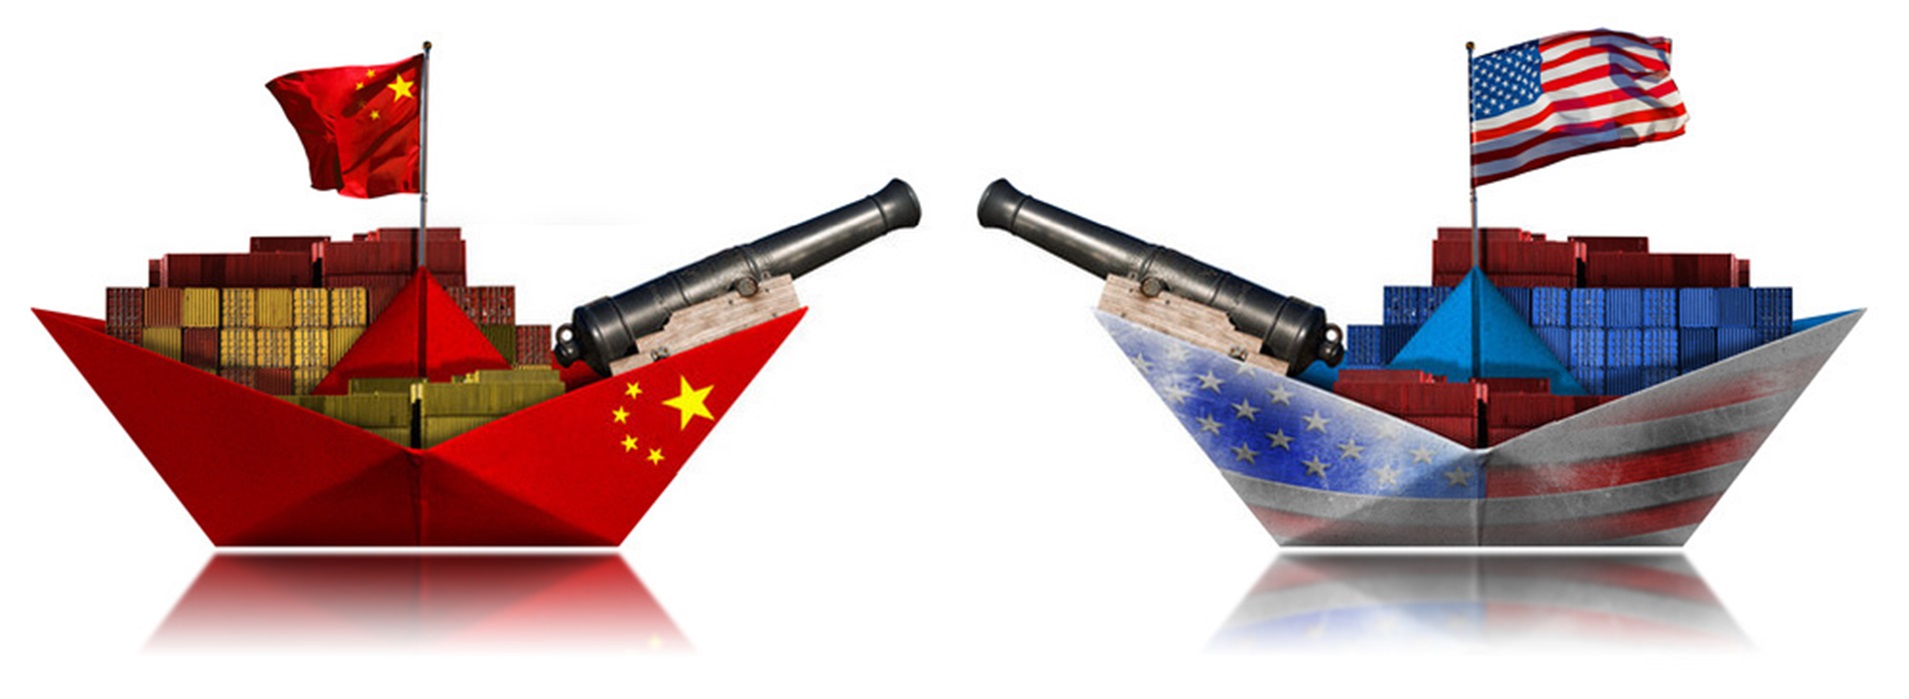 Will USA China competition end in armed conflict?